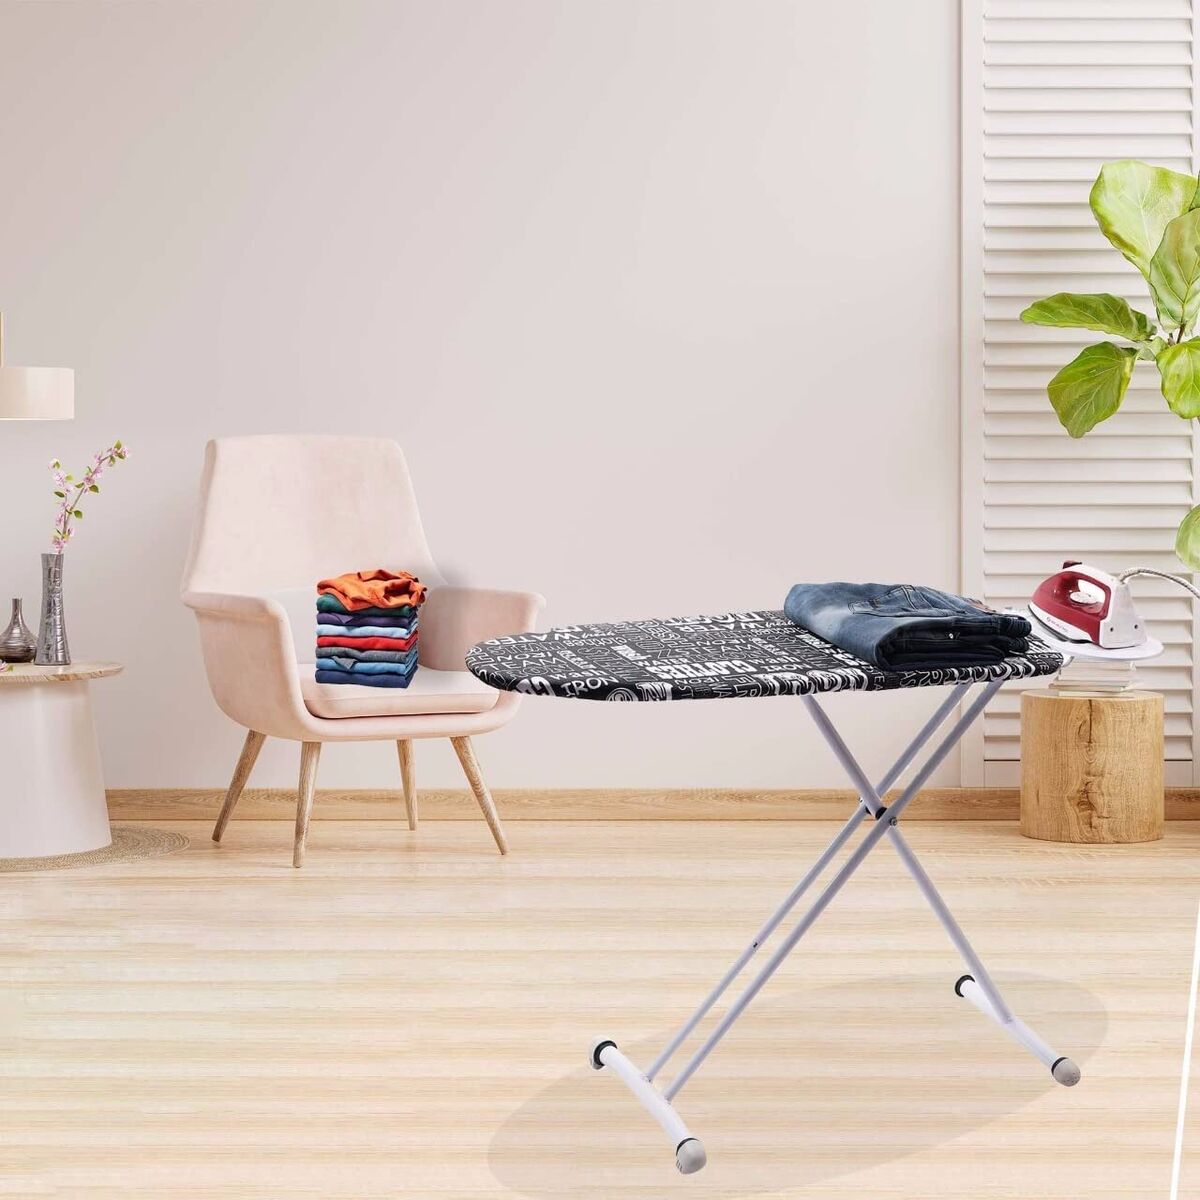 How To Unfold An Ironing Board